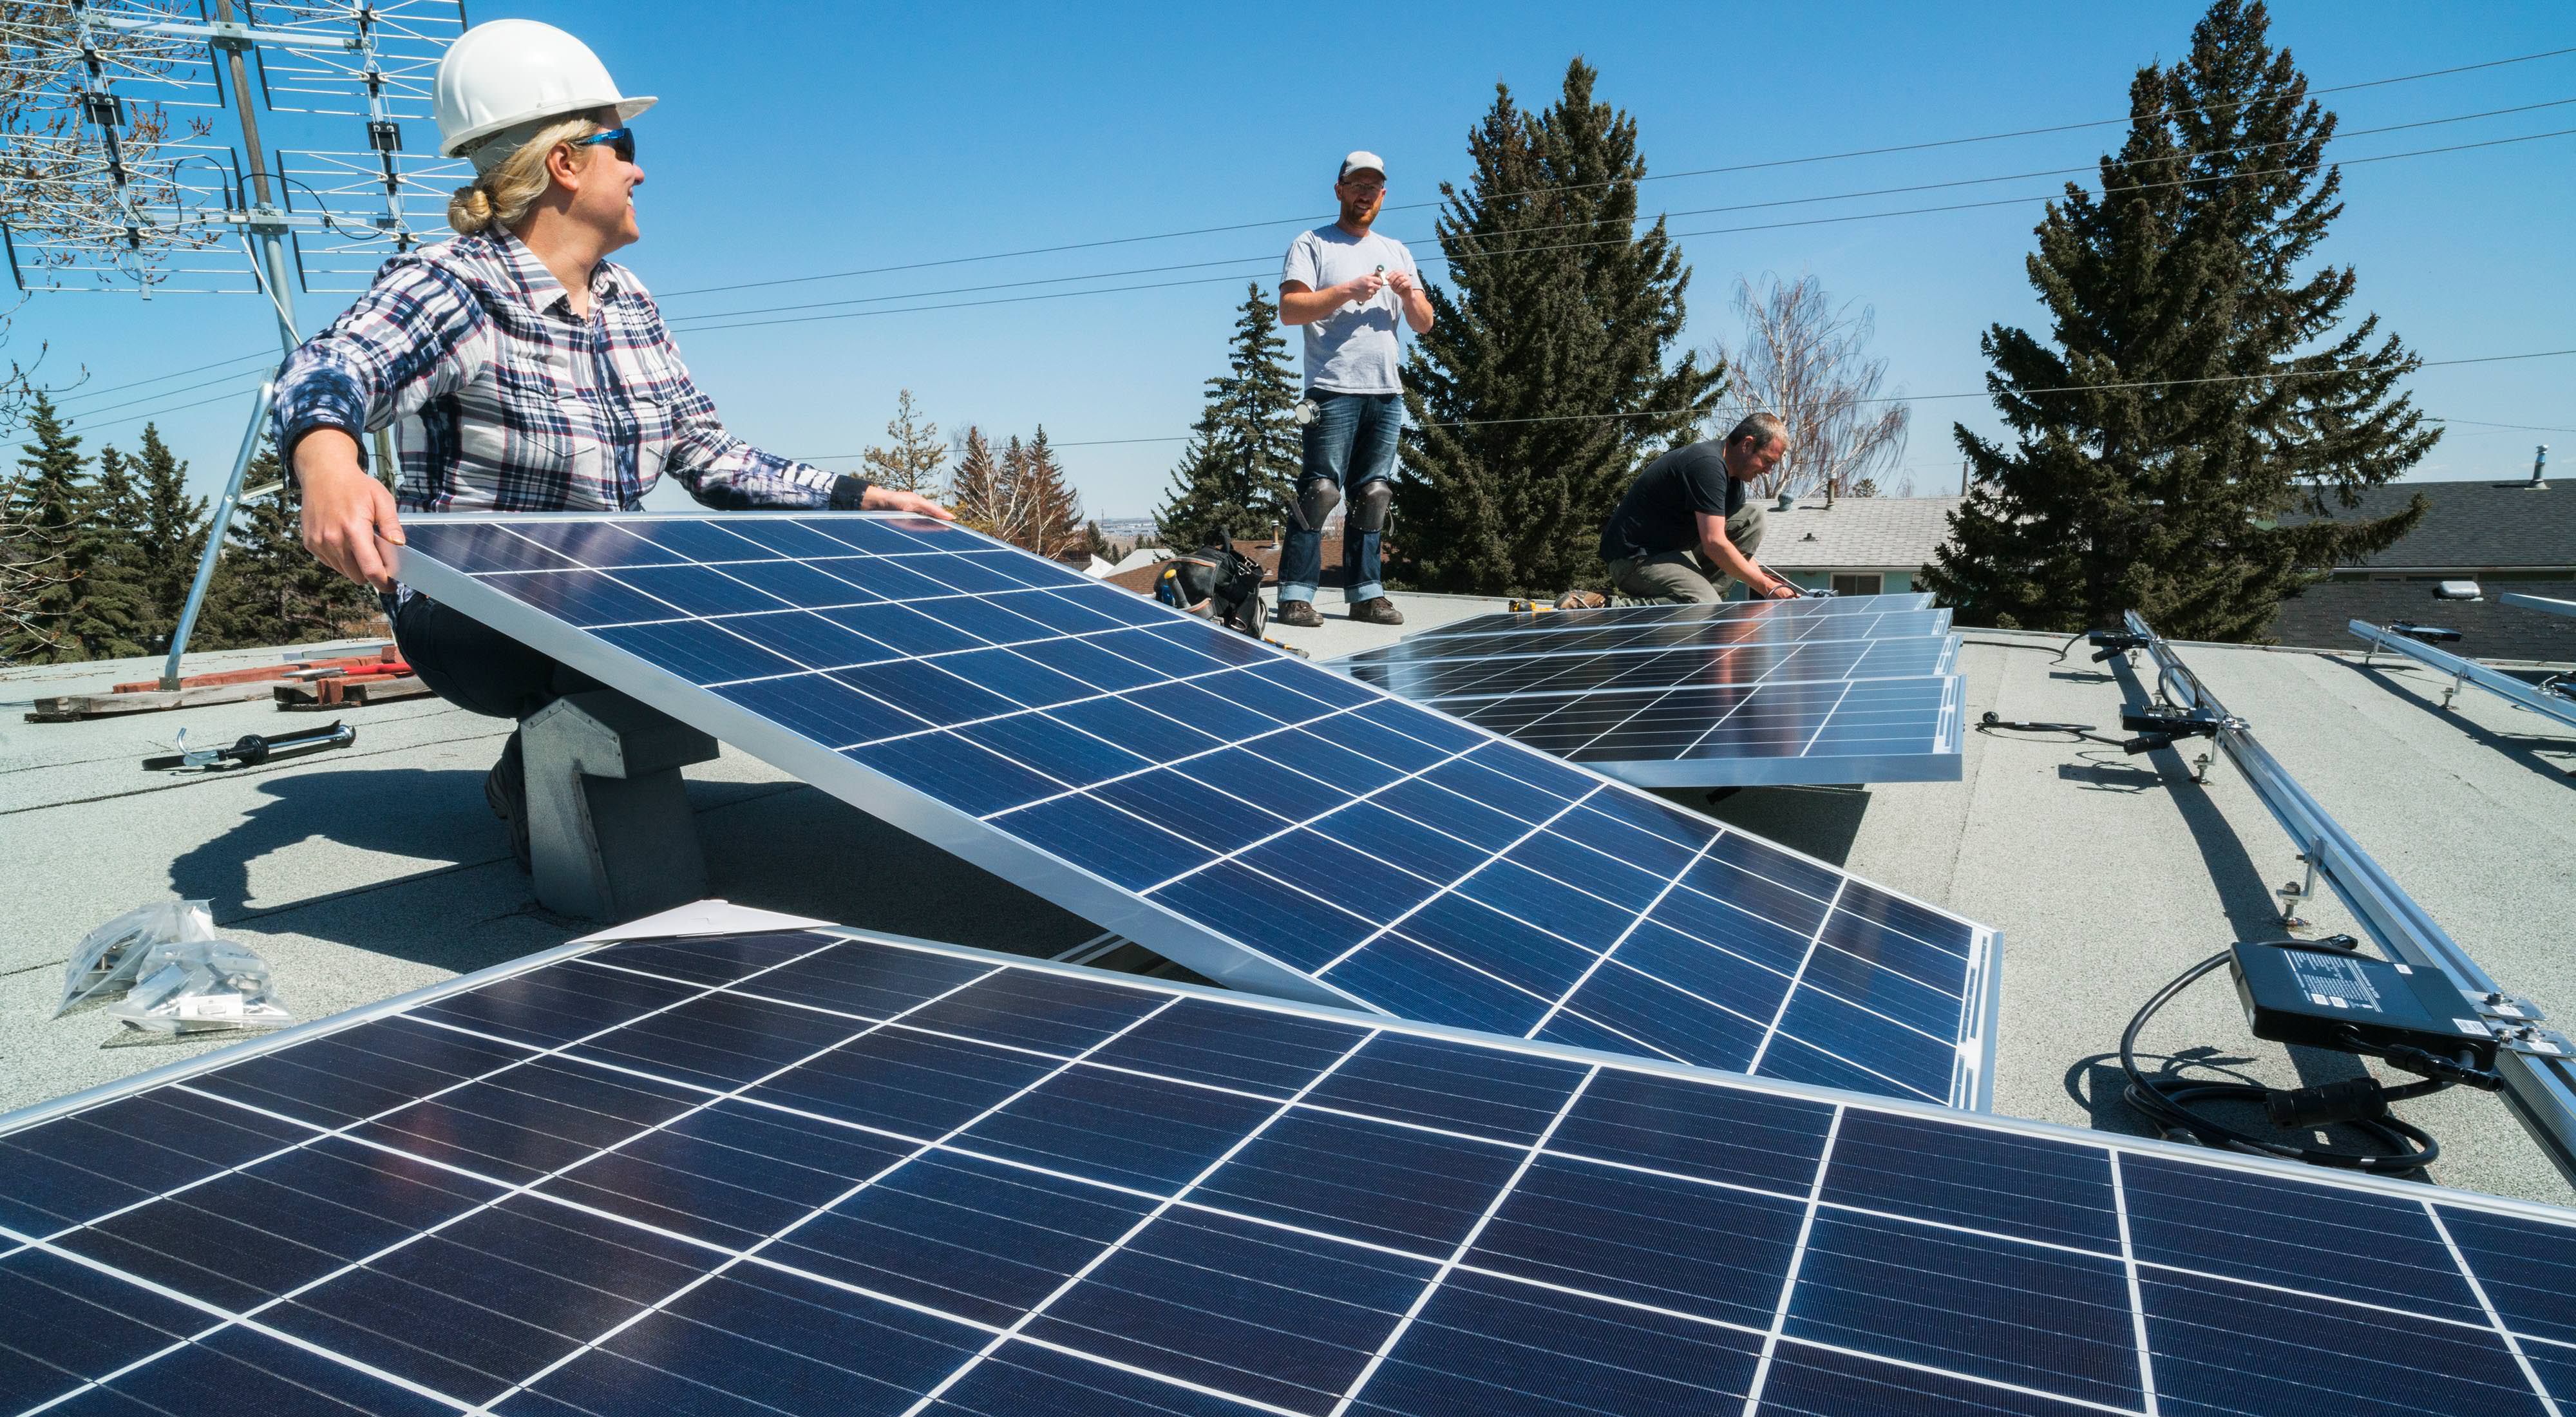 Workers installing solar panels on a residential homes roof.